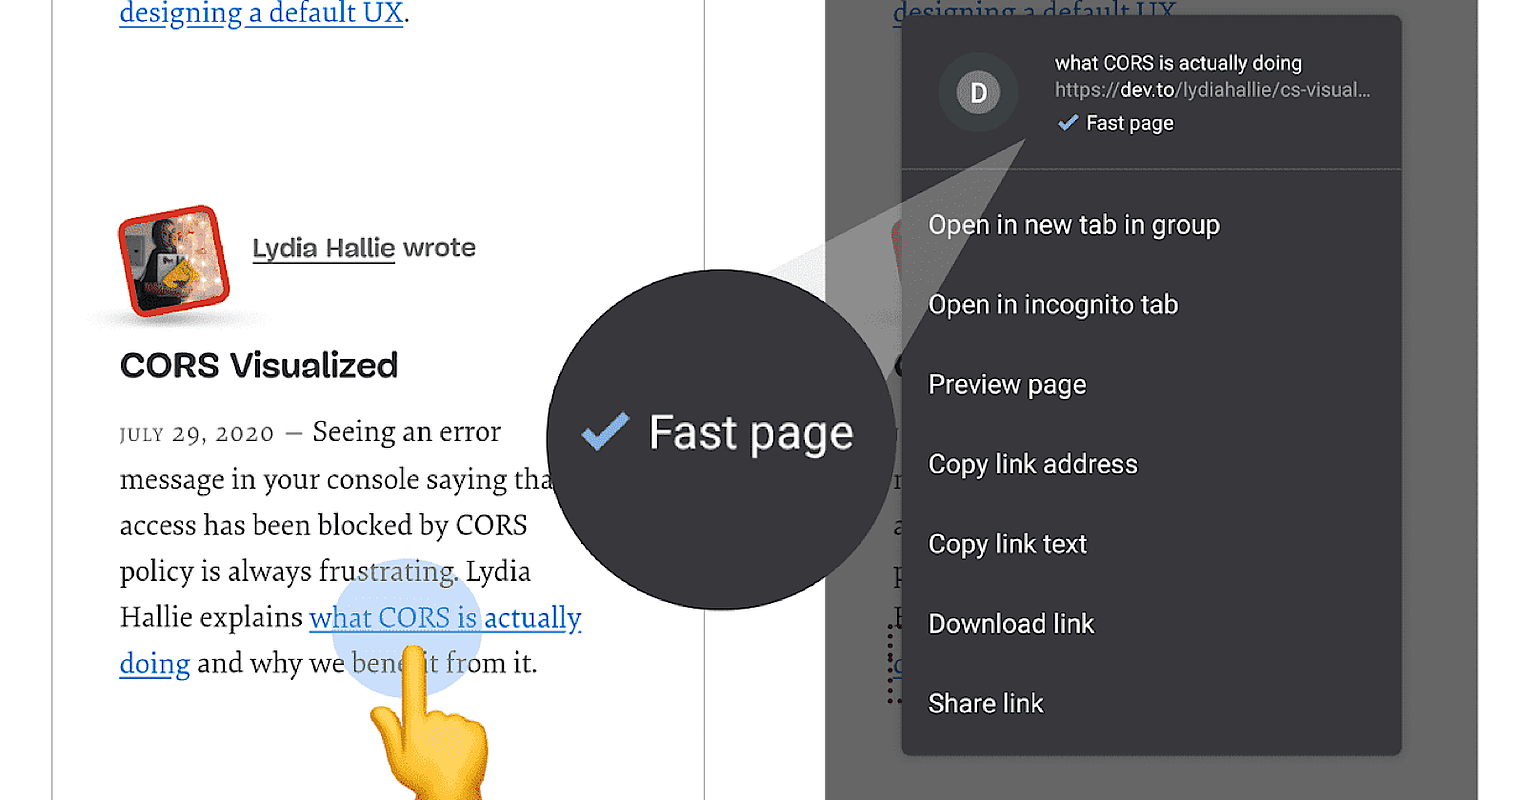 Google Chrome to Highlight Fast Pages on Mobile